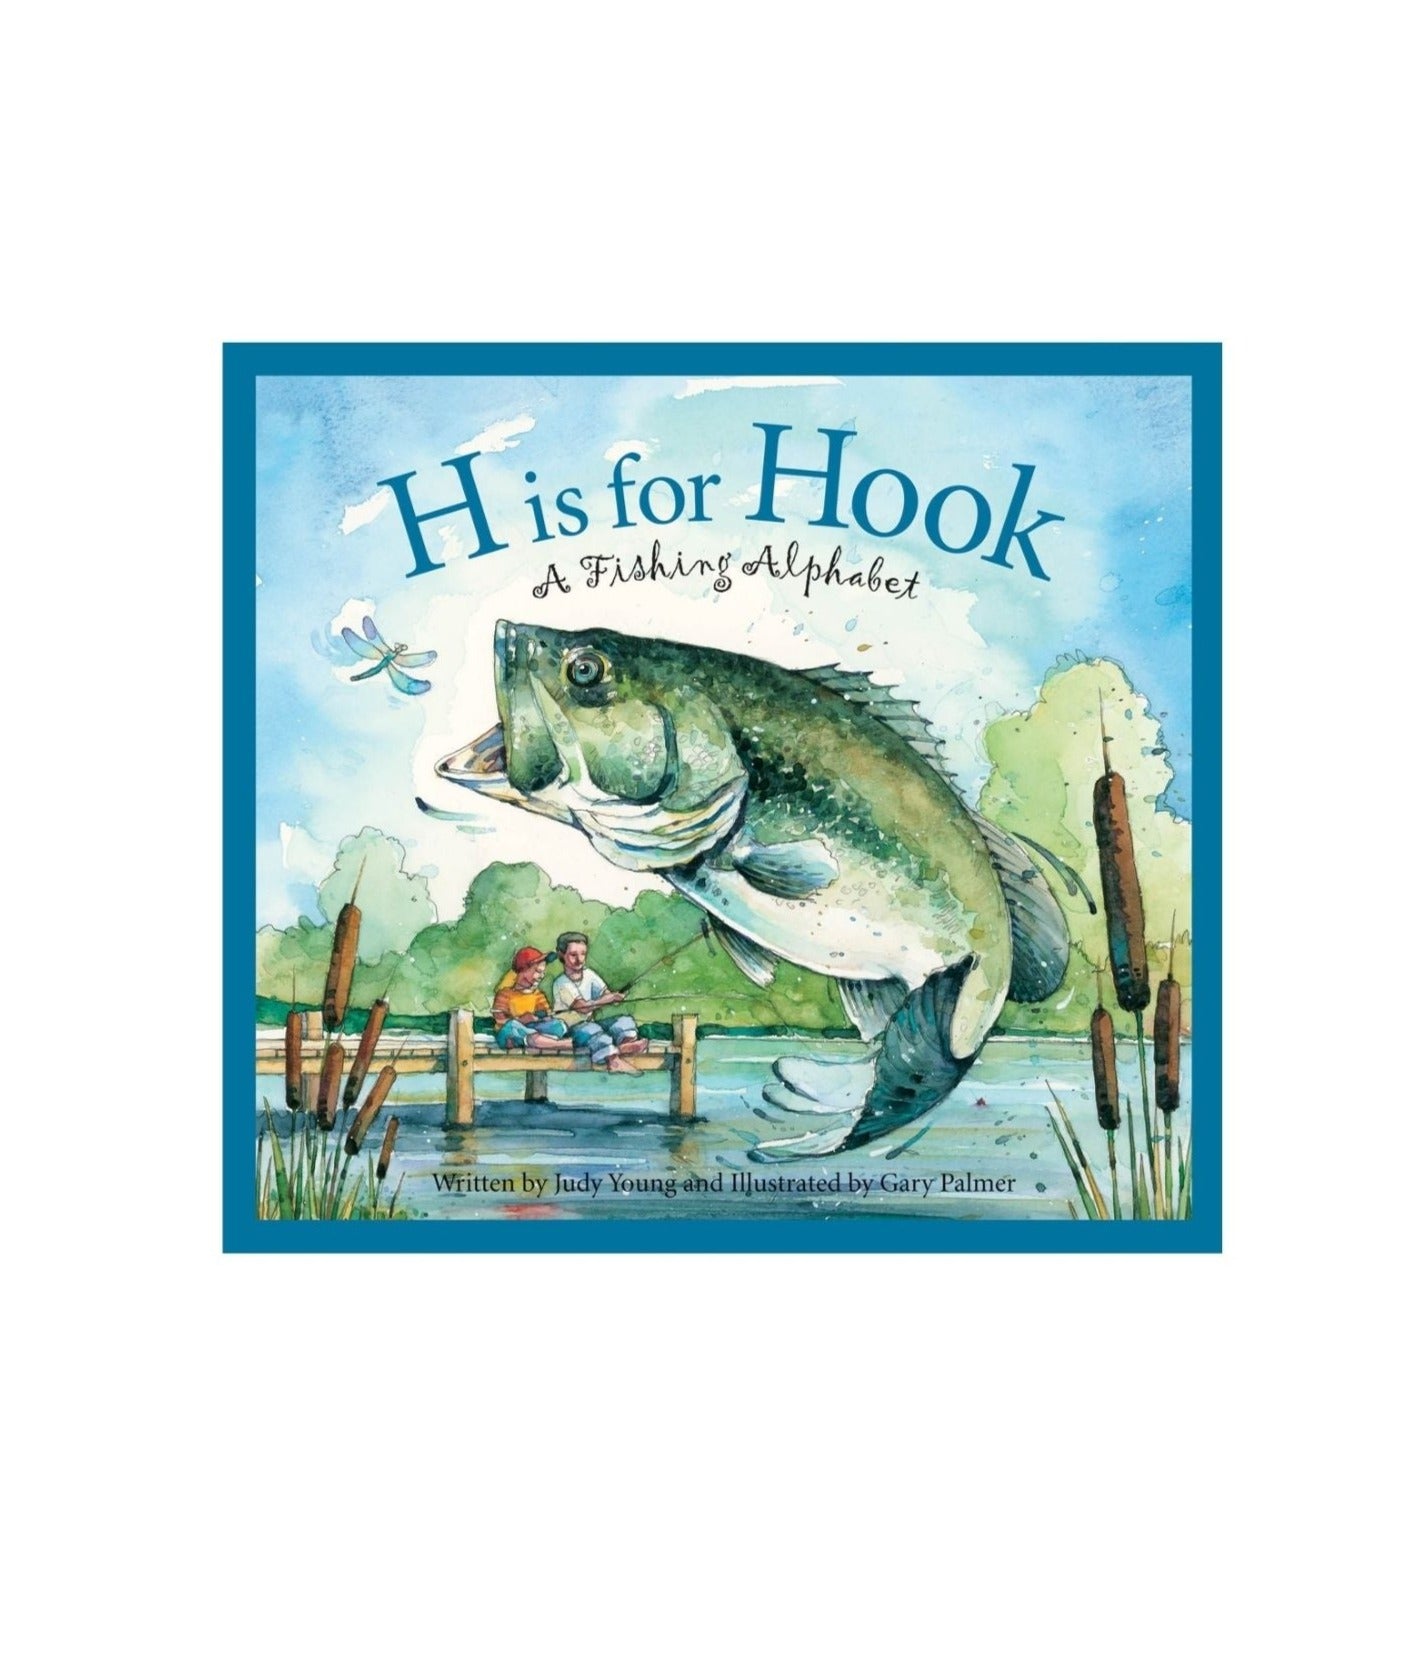 H is for Hook: A Fishing Alphabet Book